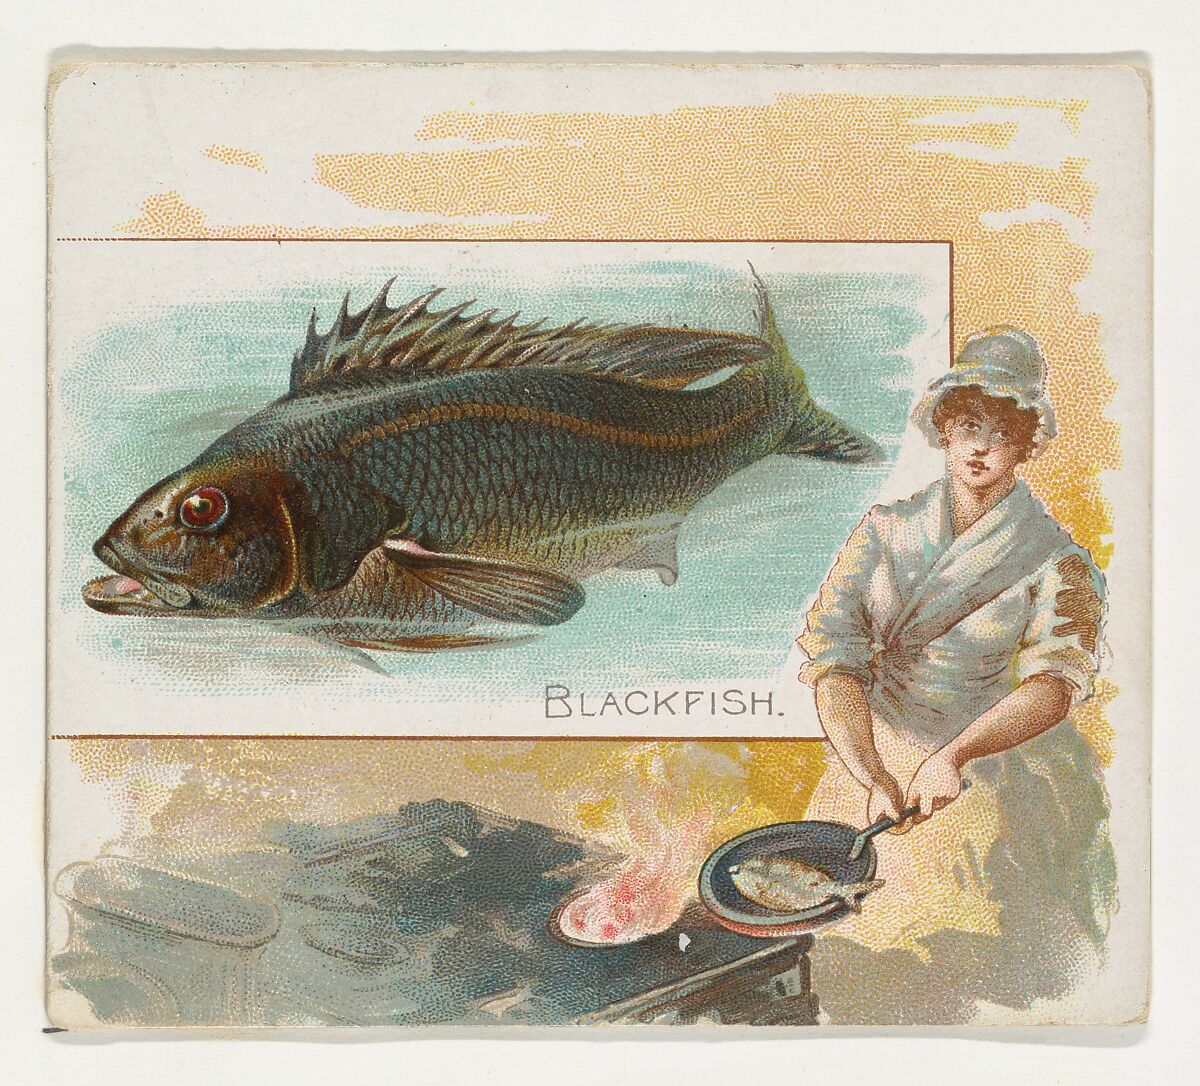 Blackfish, from Fish from American Waters series (N39) for Allen & Ginter Cigarettes, Issued by Allen &amp; Ginter (American, Richmond, Virginia), Commercial color lithograph 